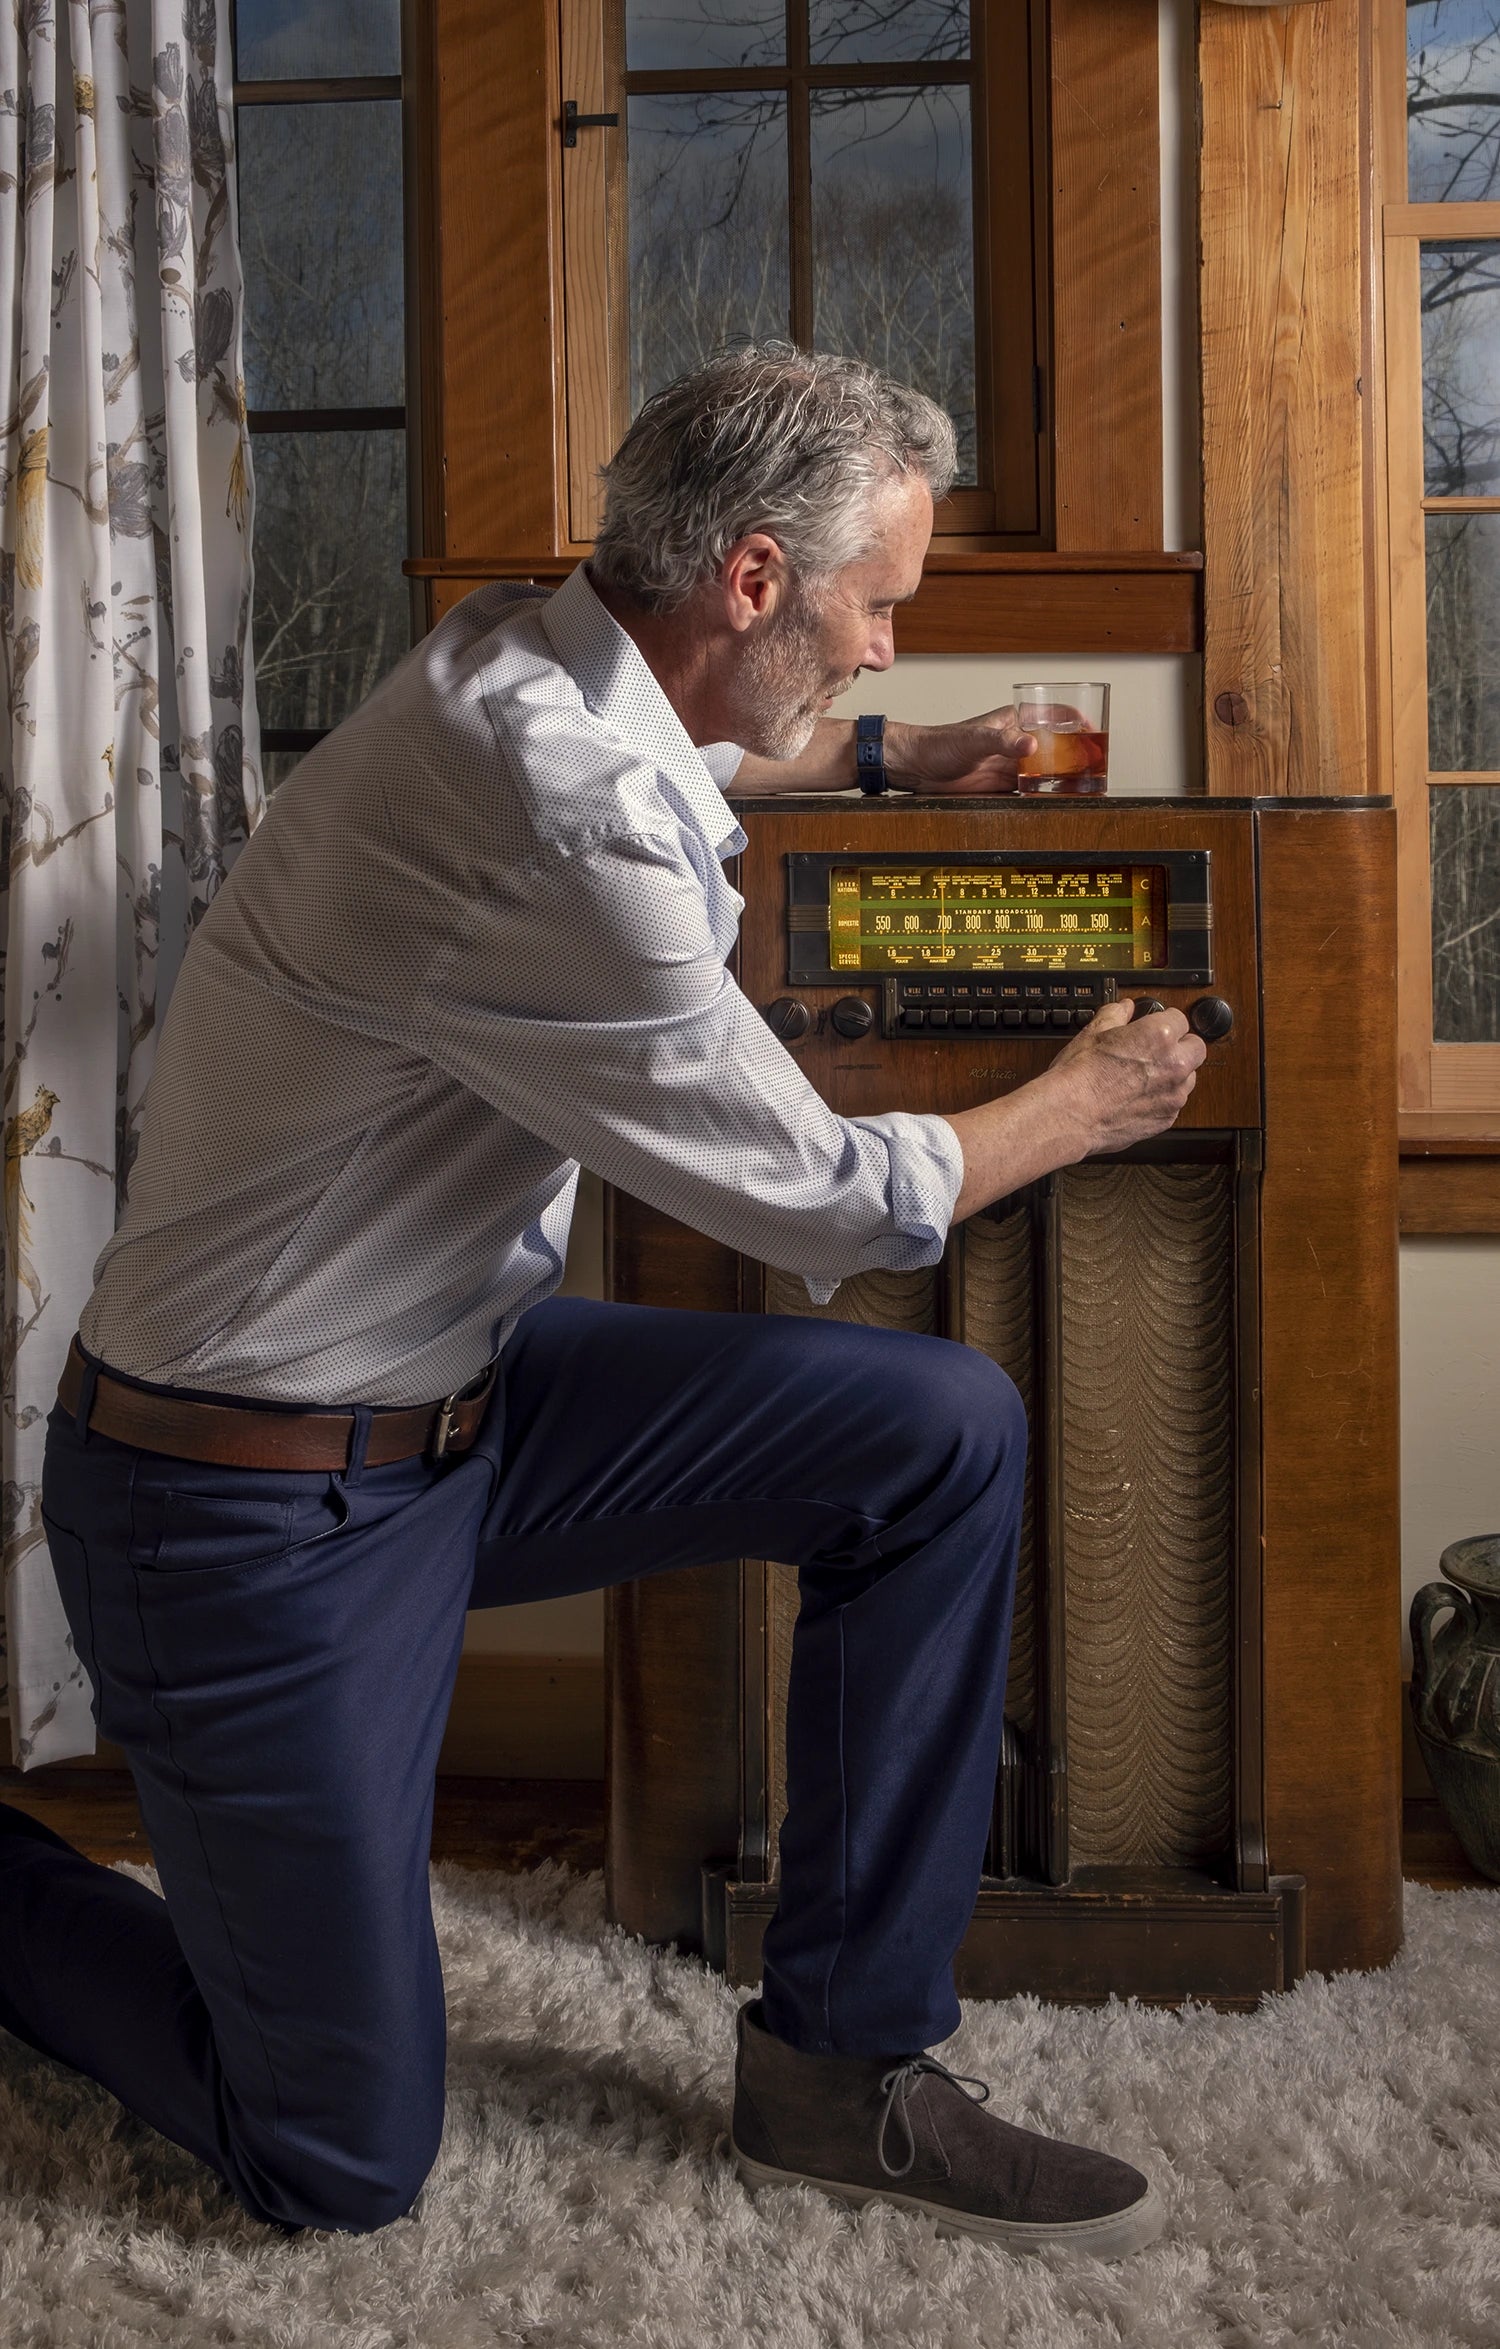 Male model tuning a large antique radio